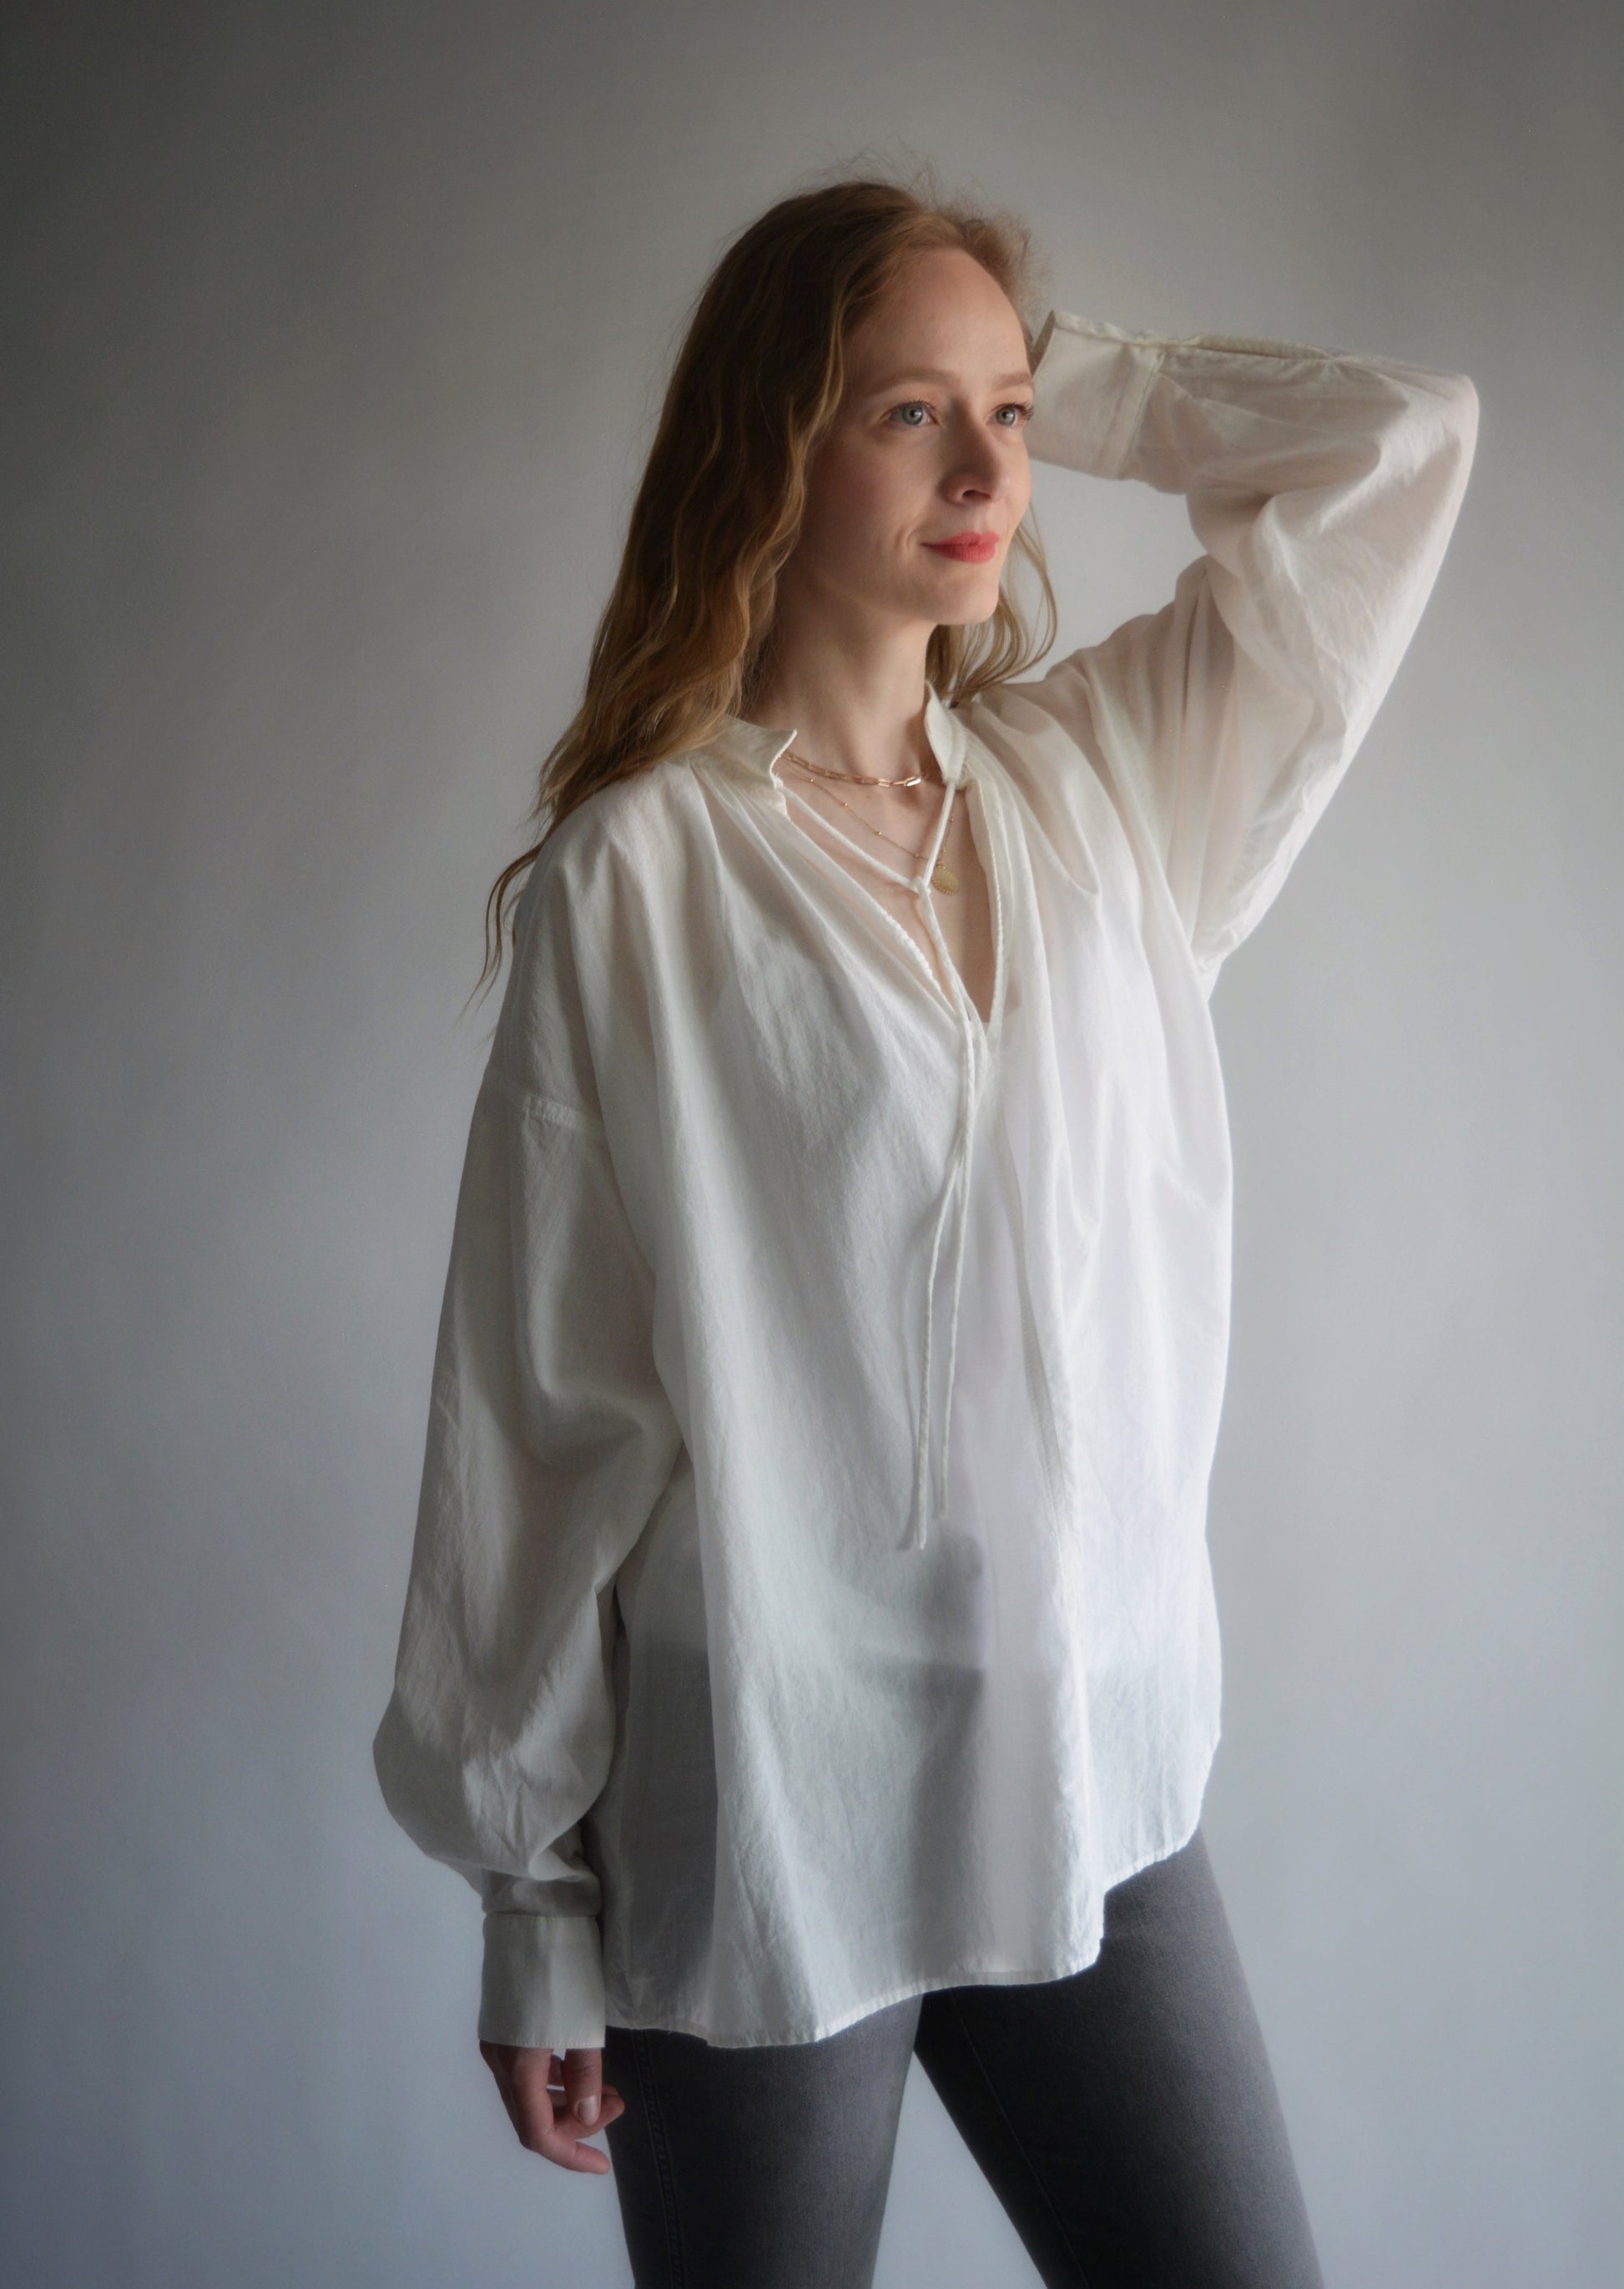 Blouse in Moonlight (White) color